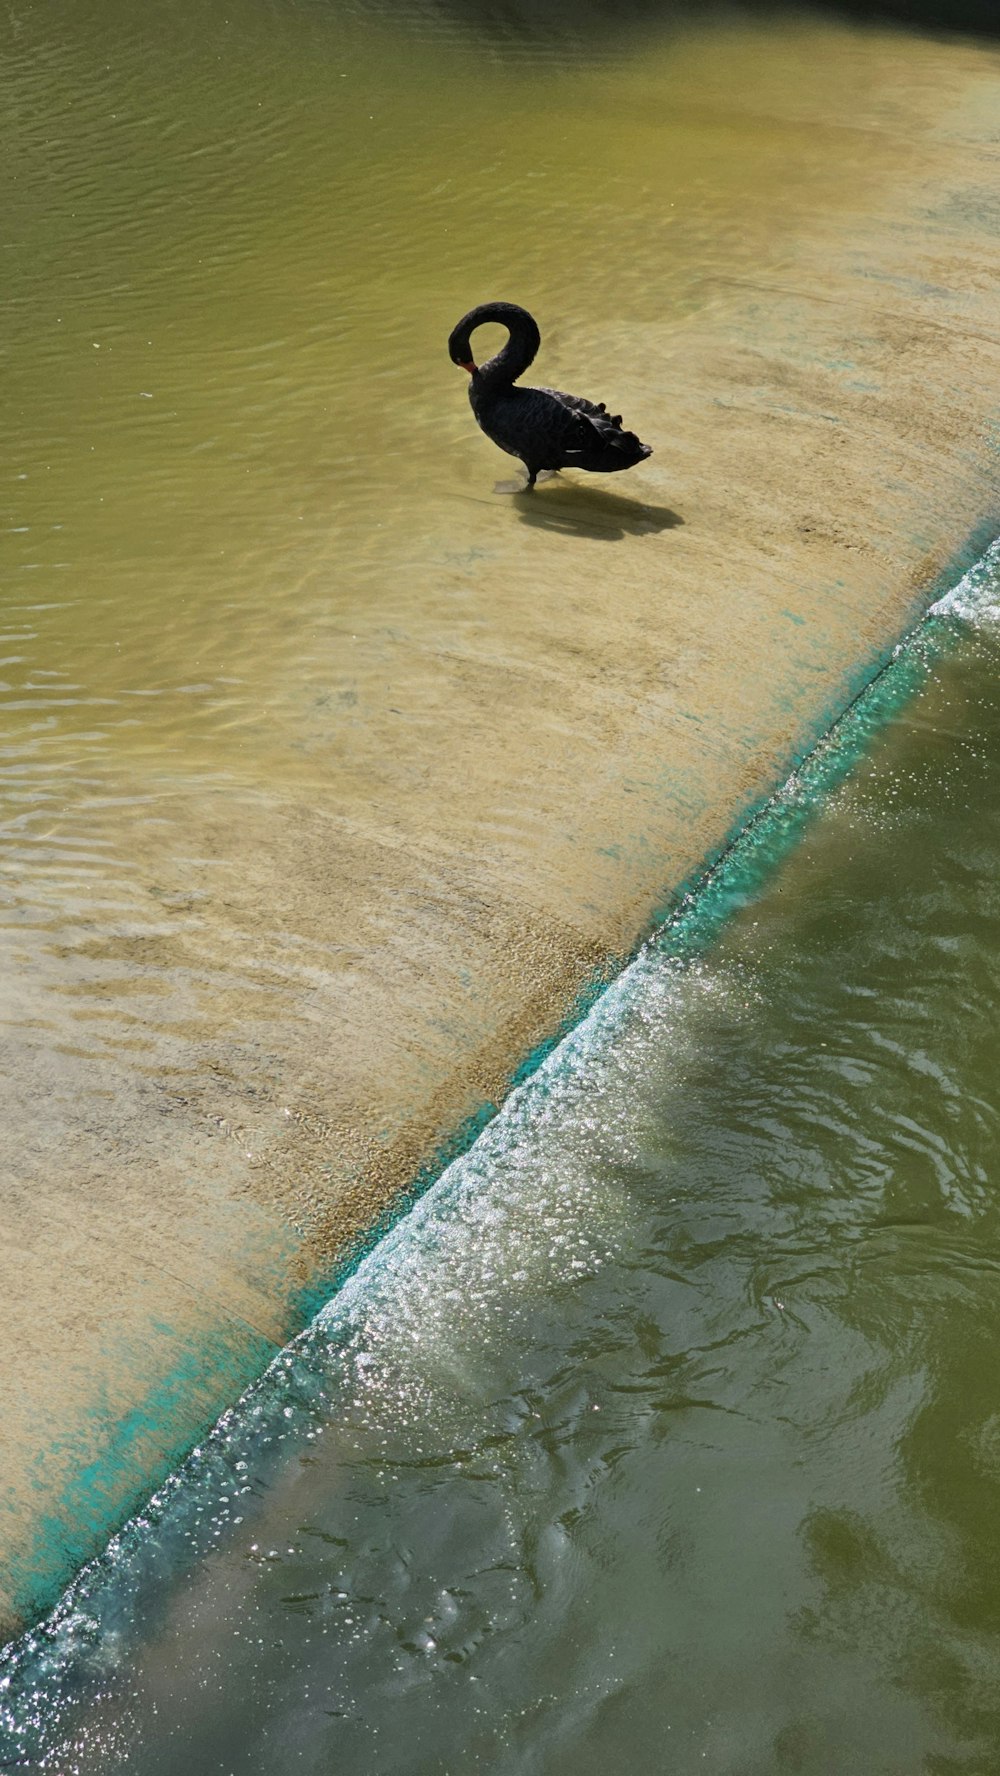 a black bird standing on the edge of a body of water